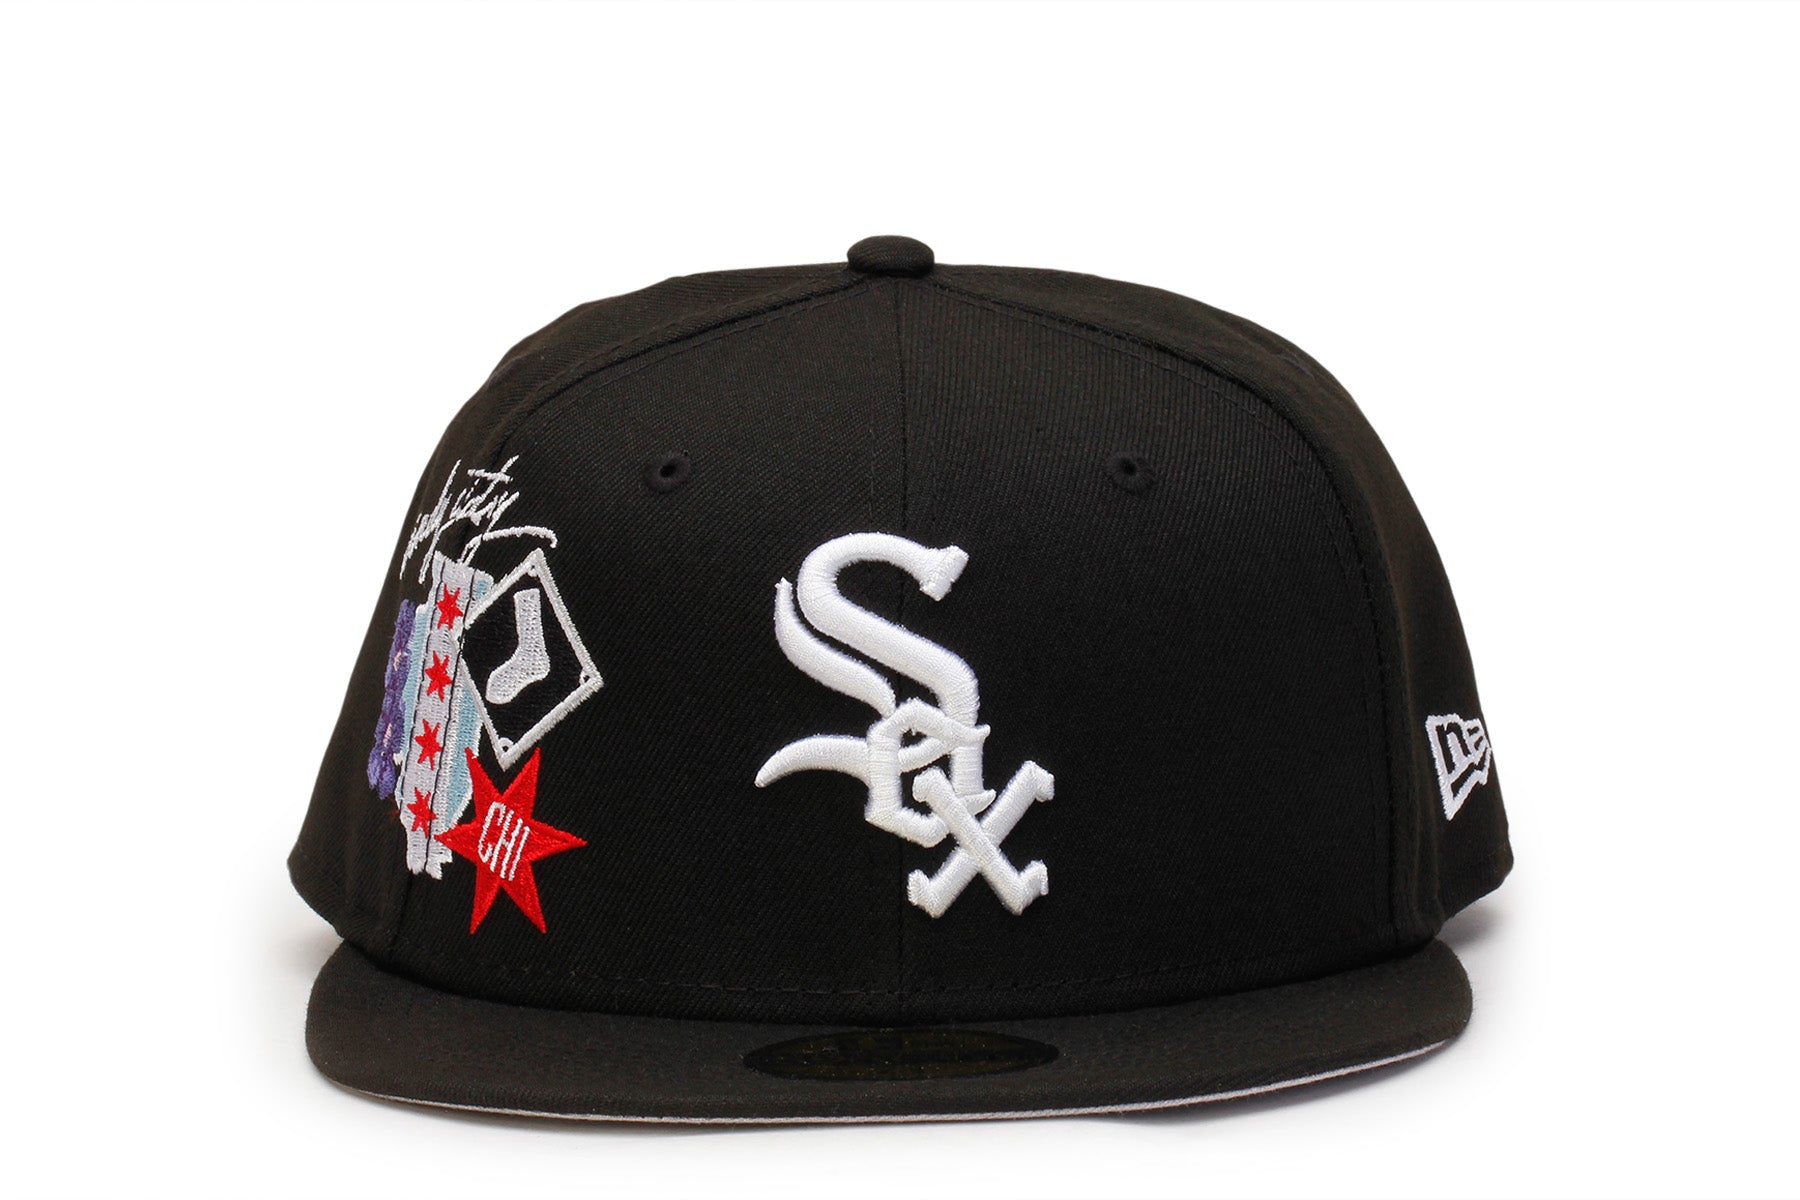 Chicago White Sox City Connect 59FIFTY Fitted Hat by New Era